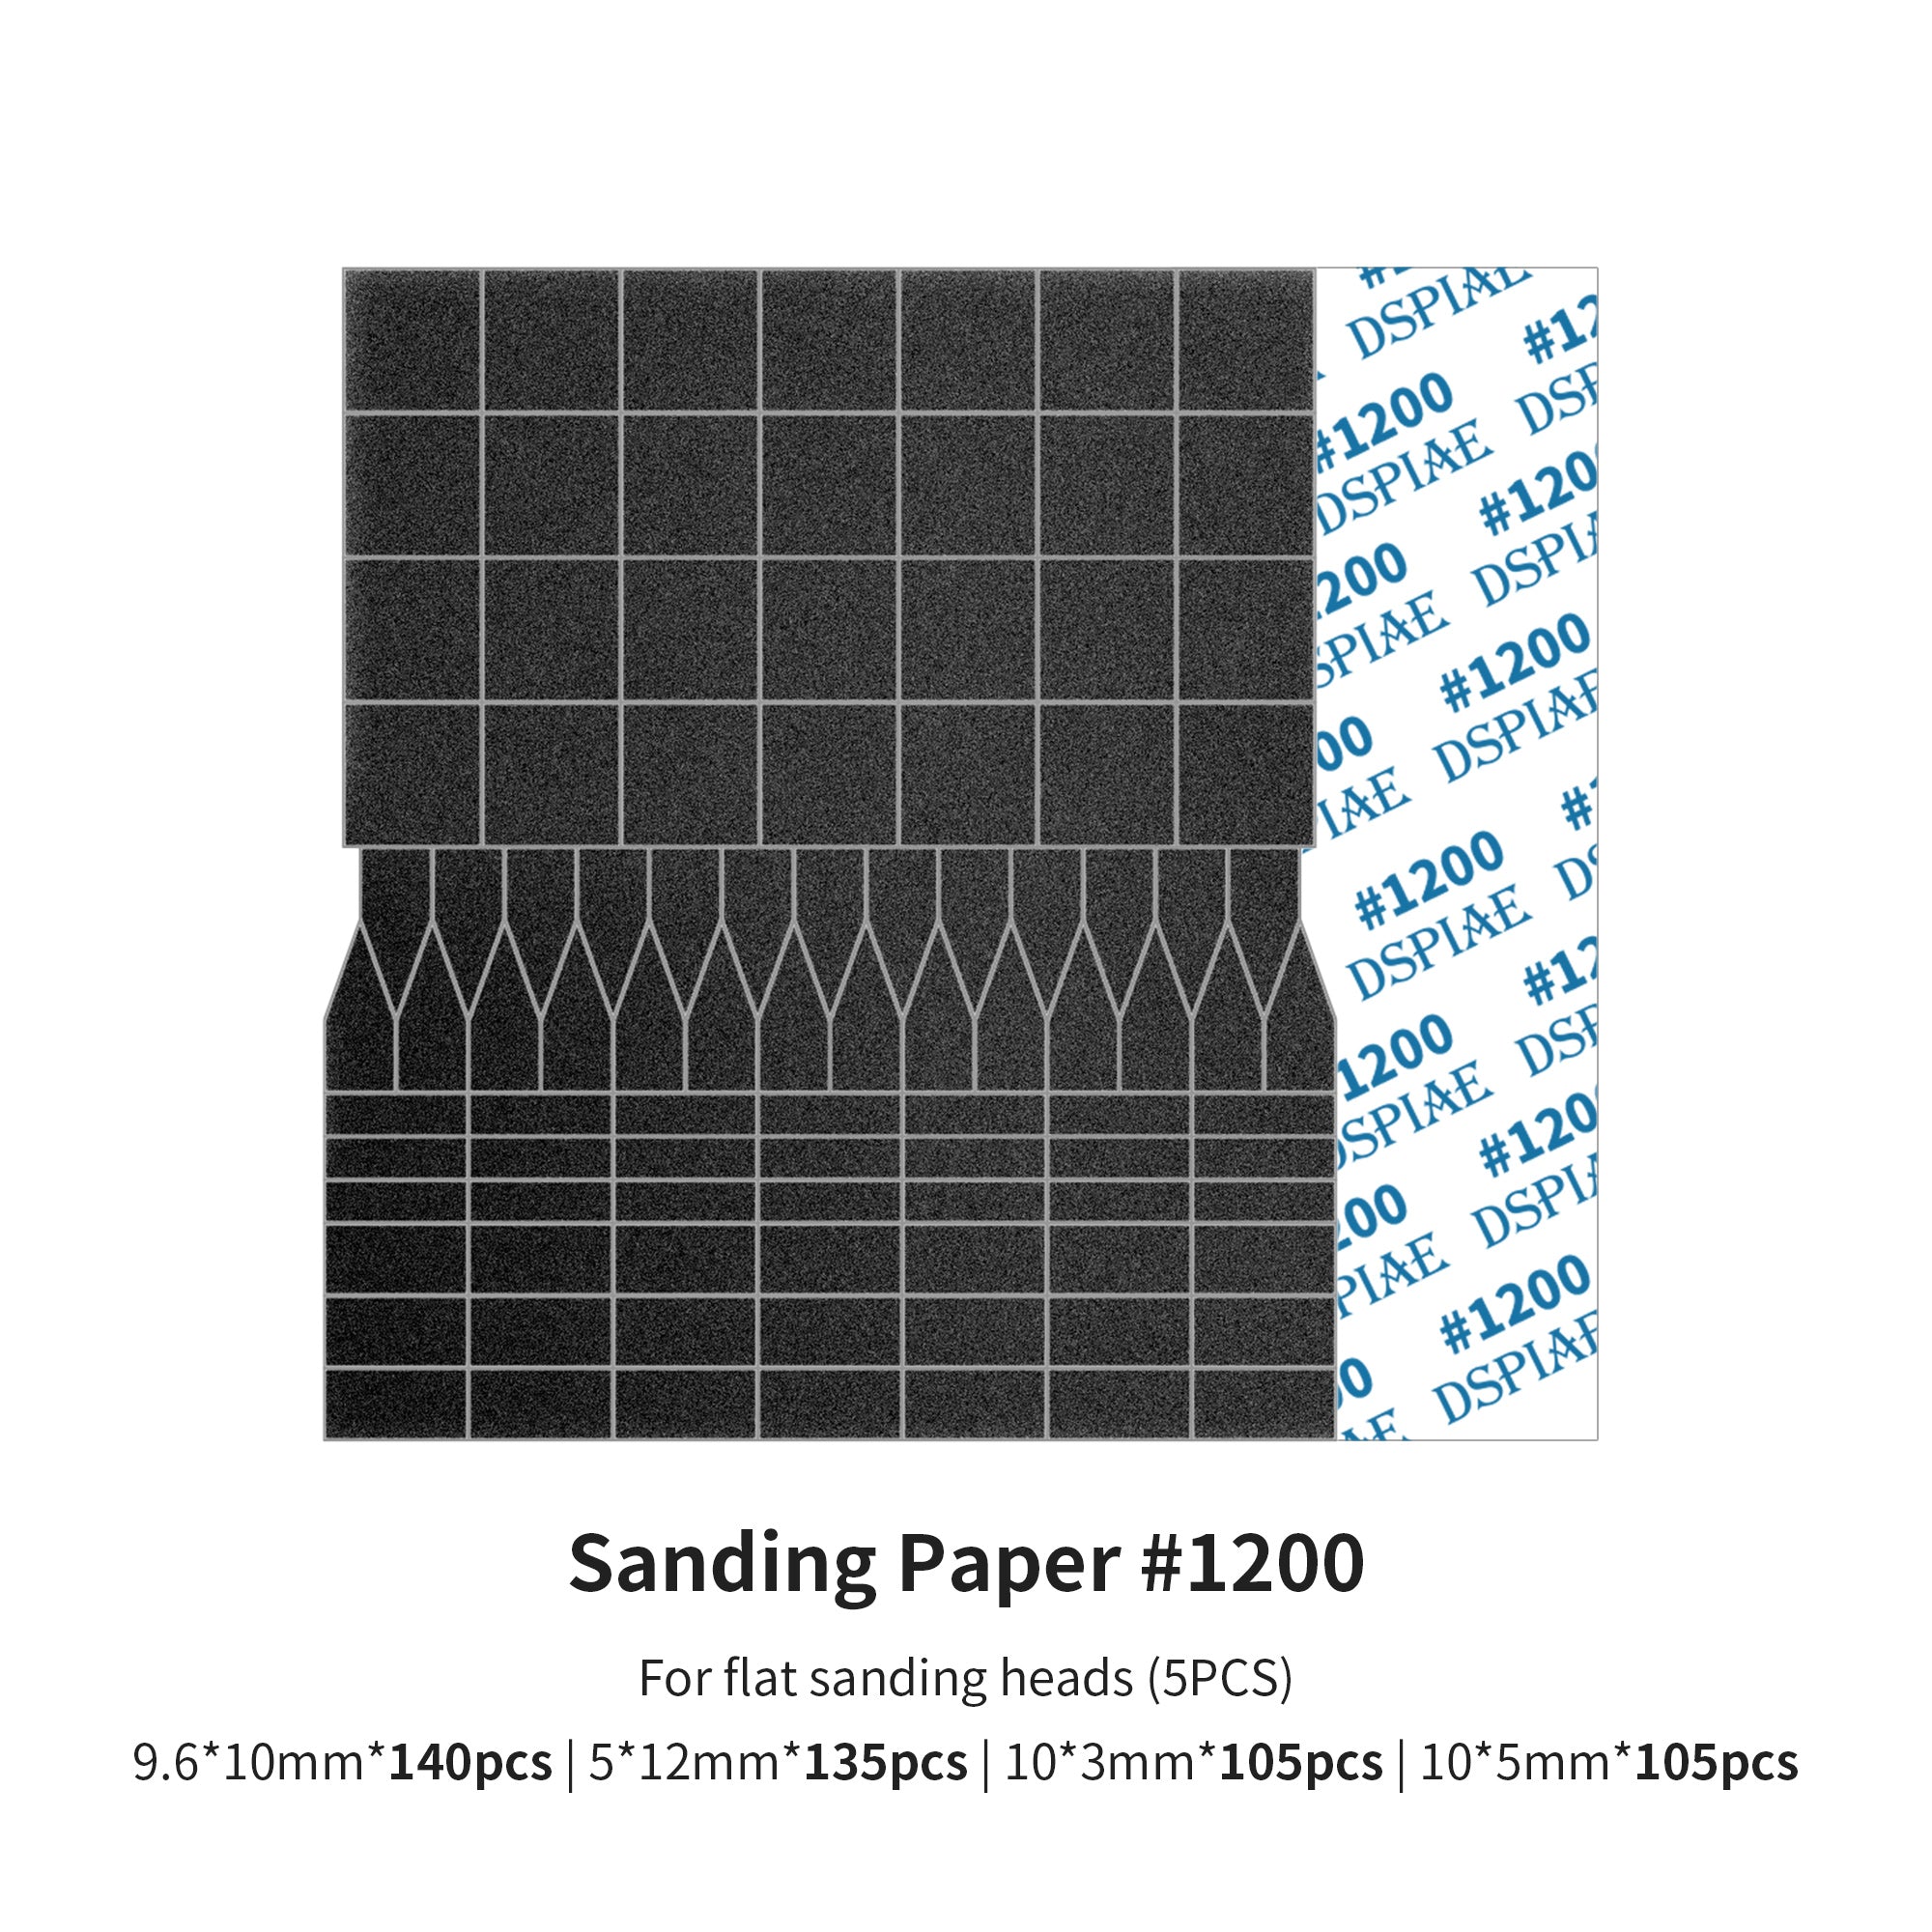 SP Sanding paper for DSPIAE ES-A RECIPROCATING SANDER (Flat head)